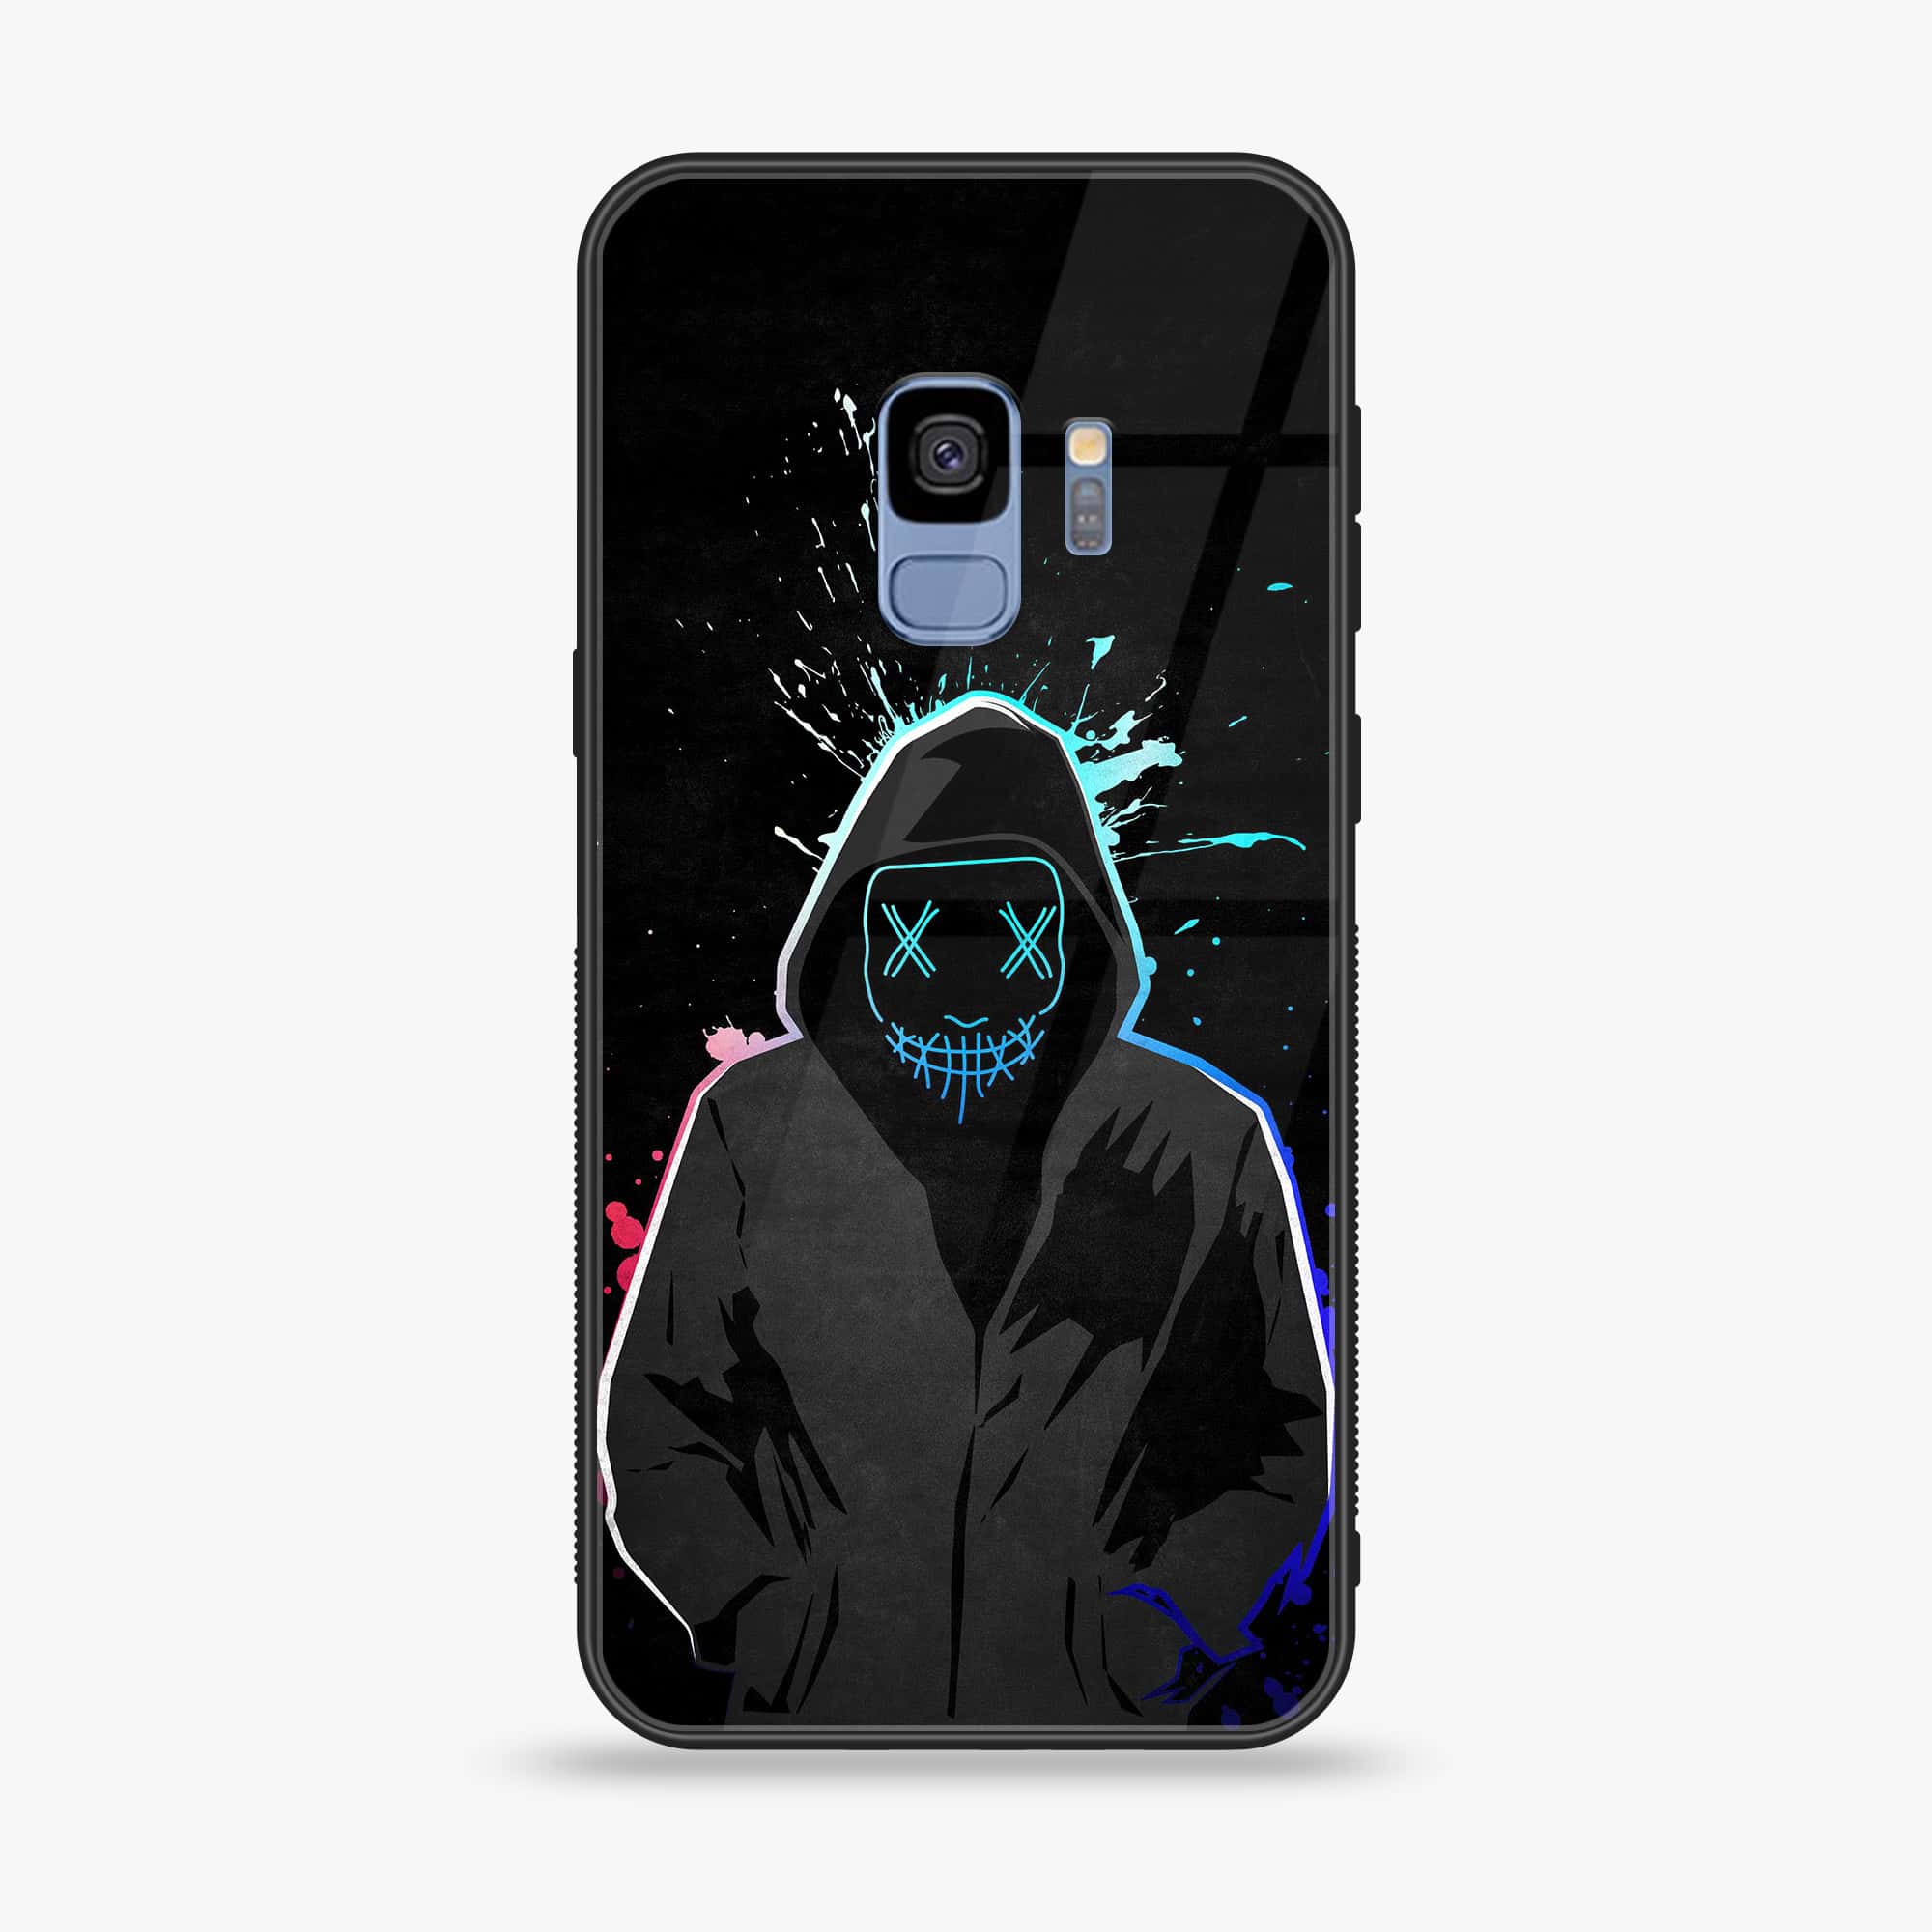 Galaxy S9 - Anonymous 2.0 Series - Premium Printed Glass soft Bumper shock Proof Case